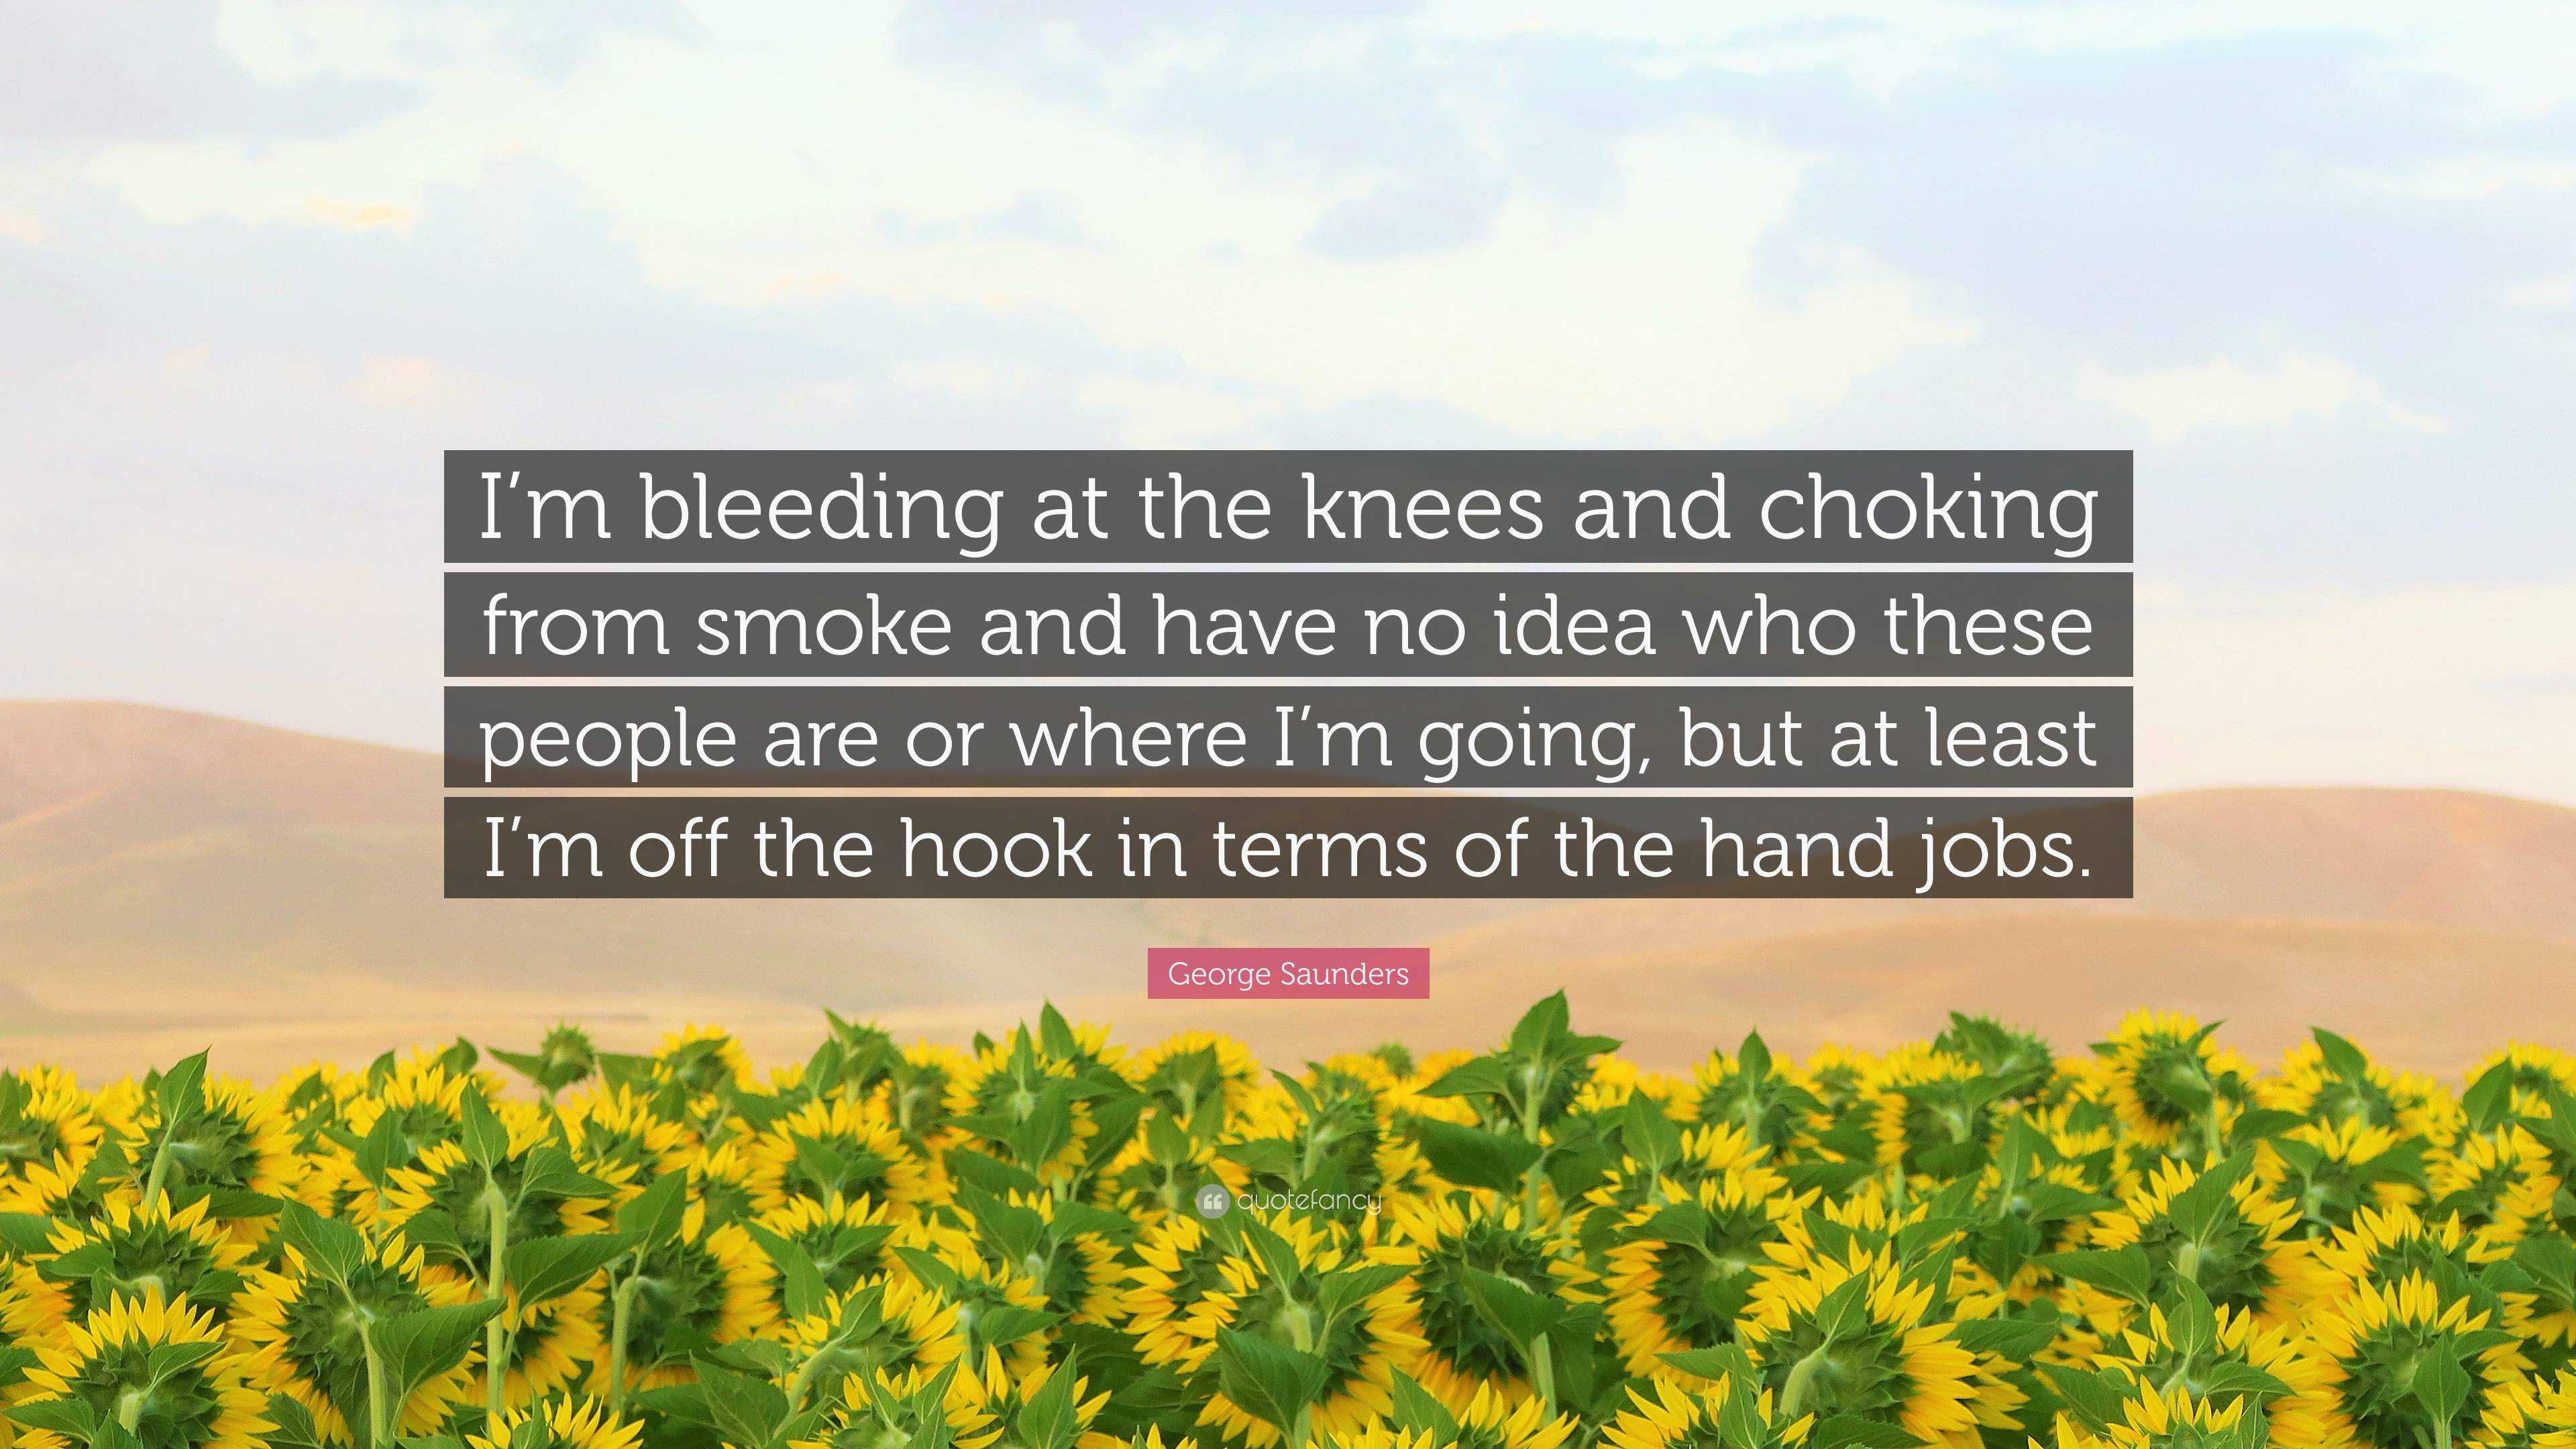 George Saunders Quote: “I'm bleeding at the knees and choking from